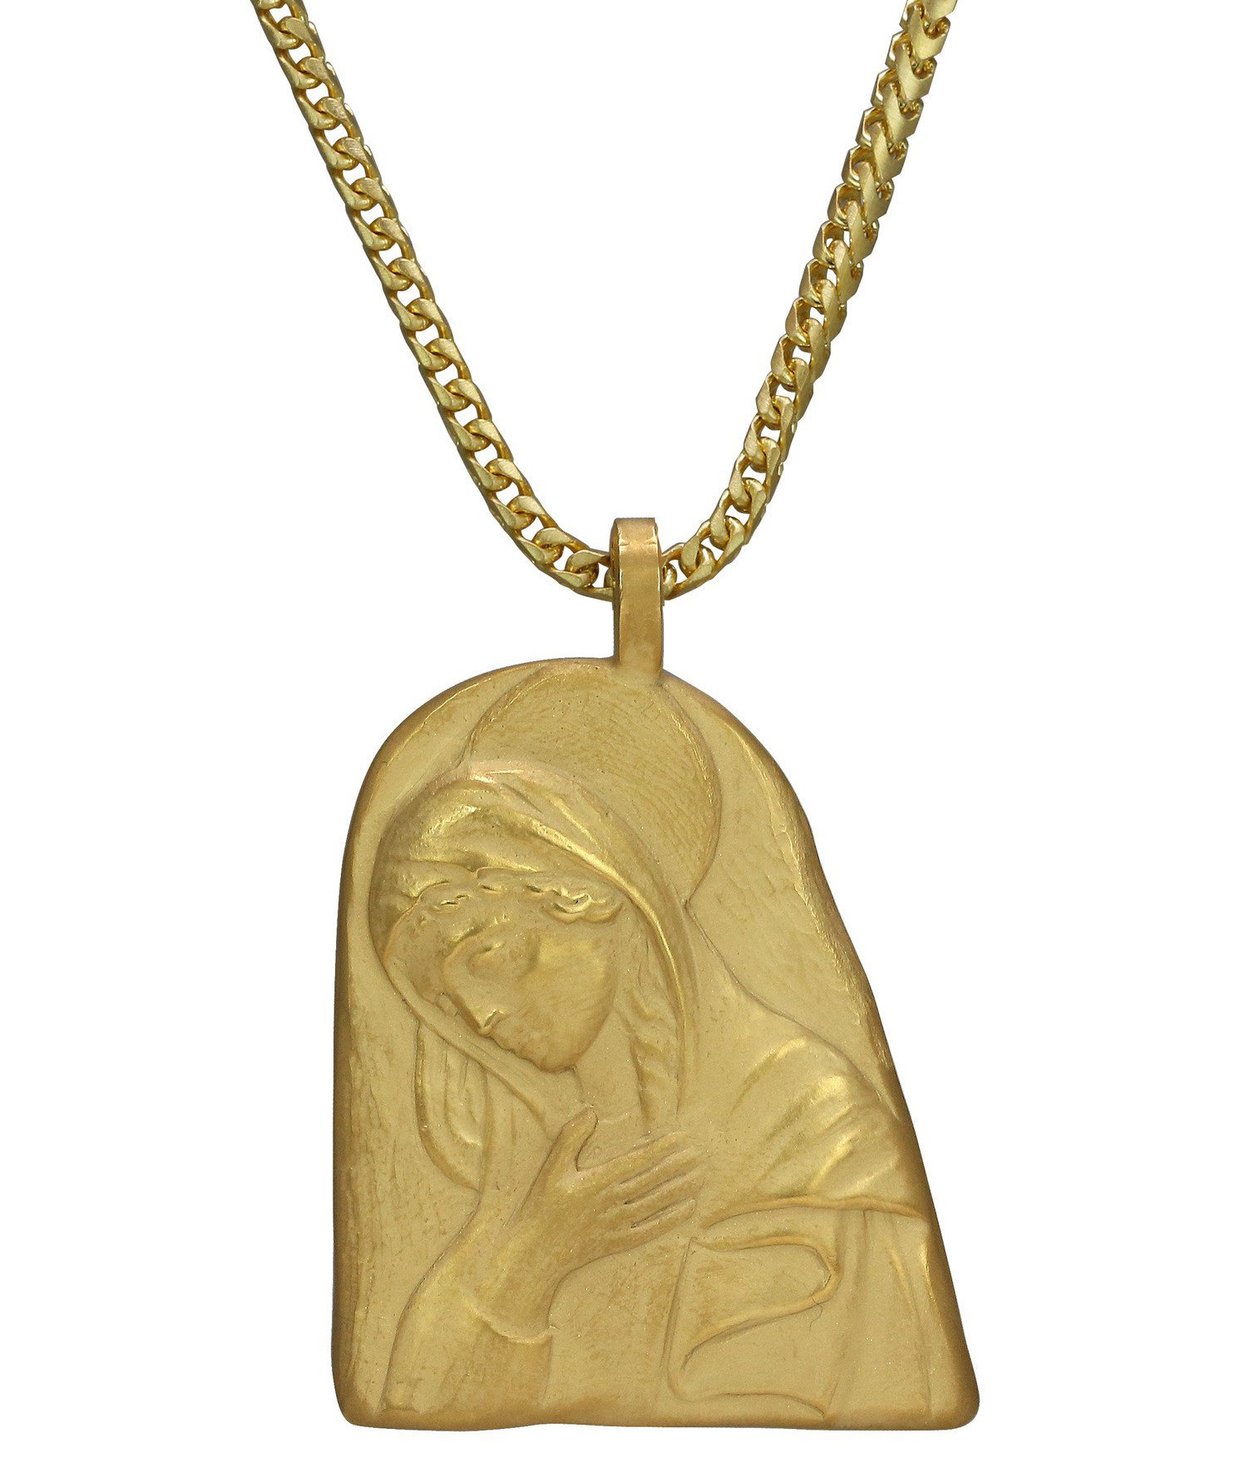 One of the Renaissance-inspired pieces from Kanye West's new Yeezy jewellery collection, at yeezysupply.com